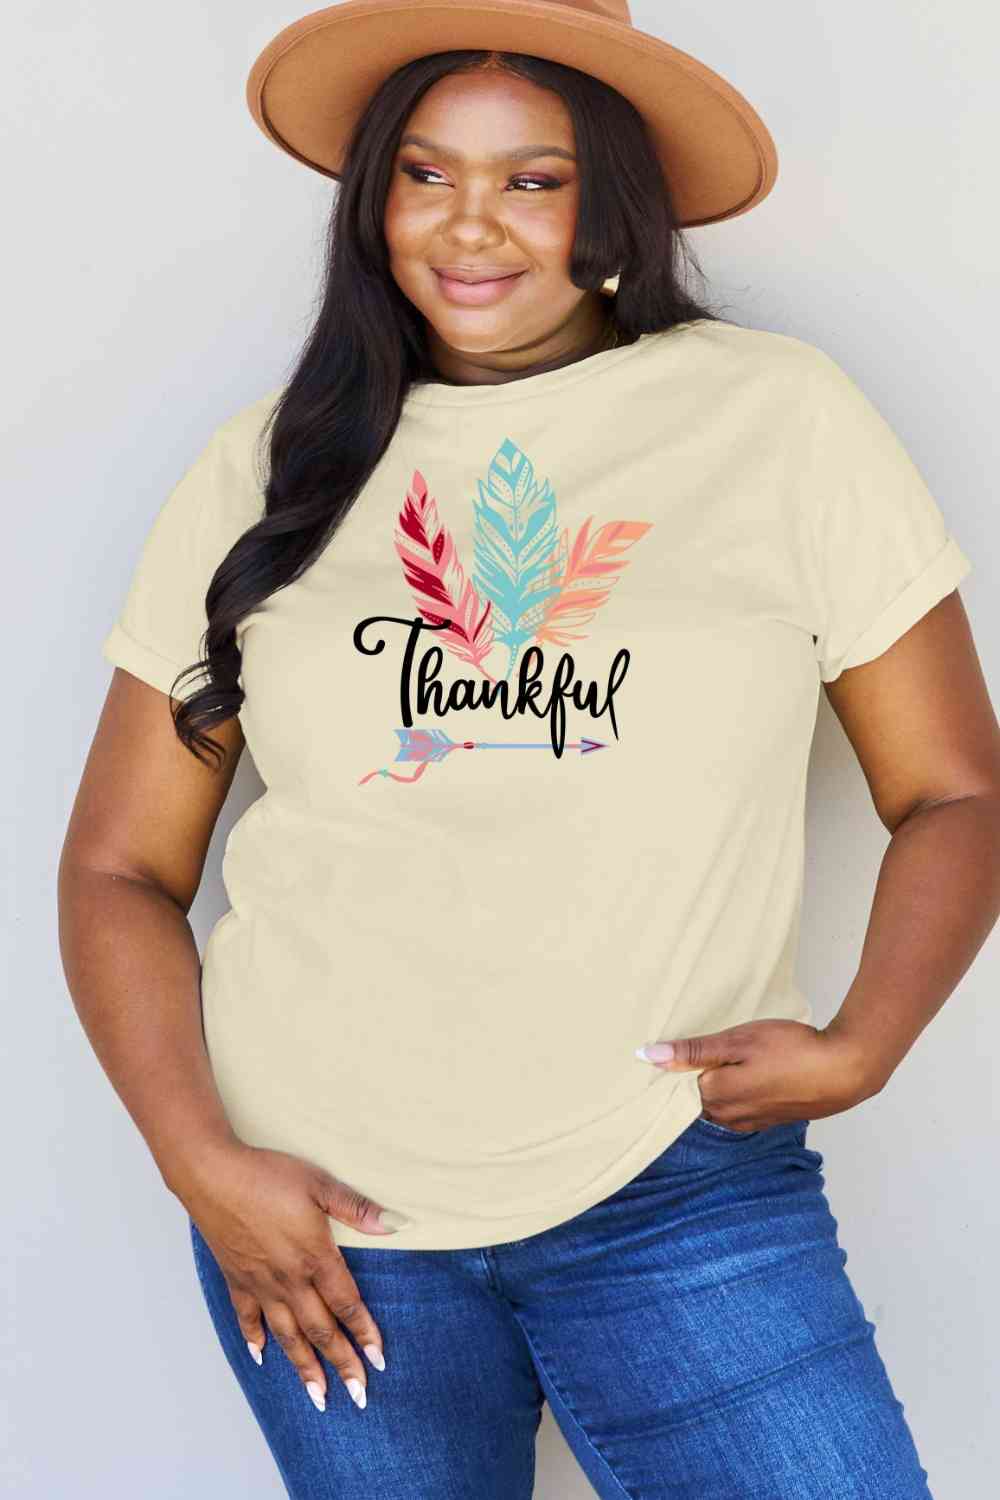 Simply Love Full Size THANKFUL Graphic T-Shirt BLUE ZONE PLANET